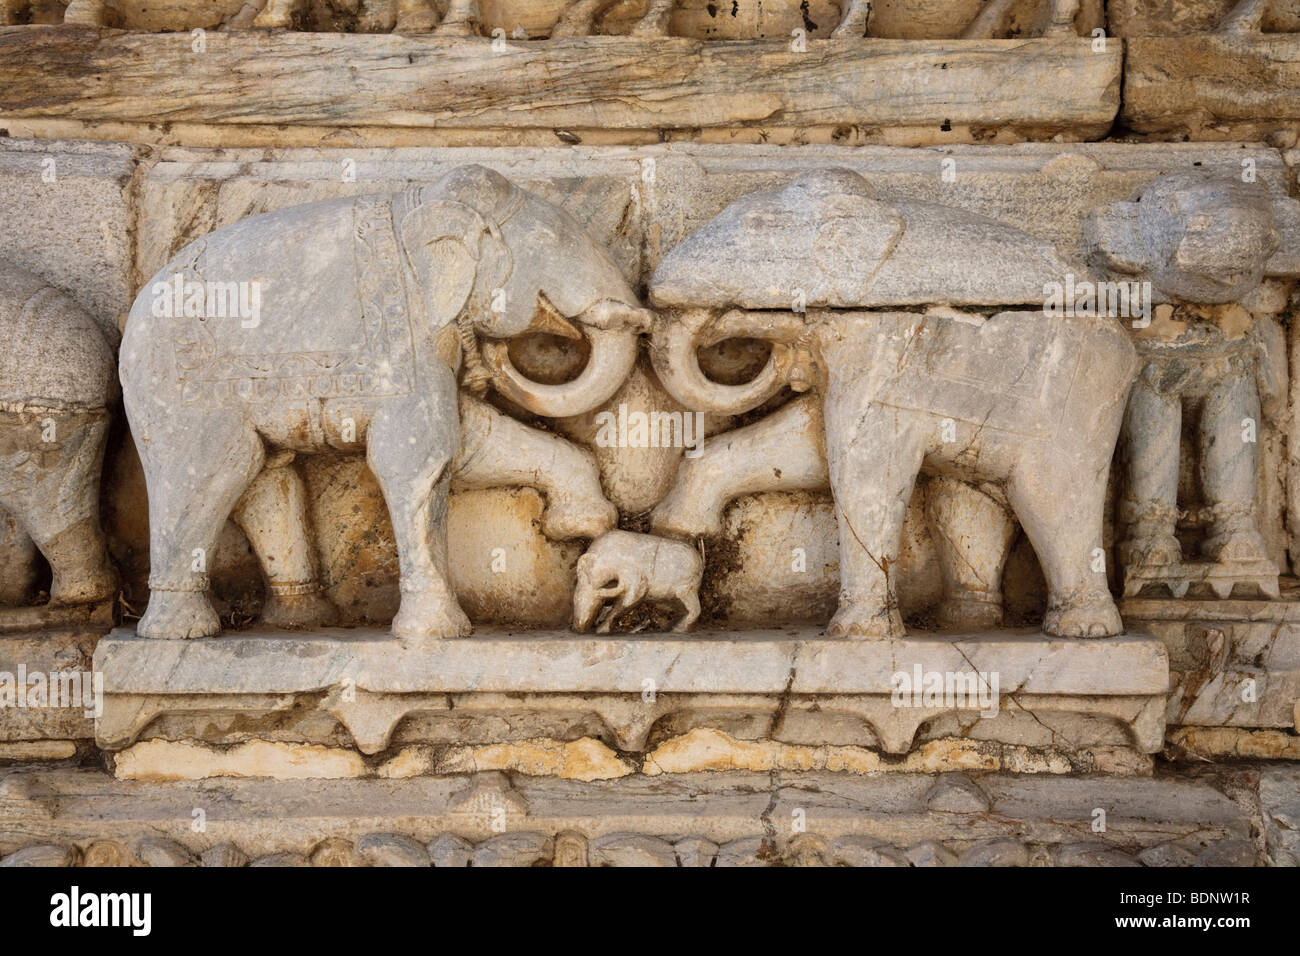 Carved elephants on the exterior wall of Jagdish Temple, Udaipur, India Stock Photo